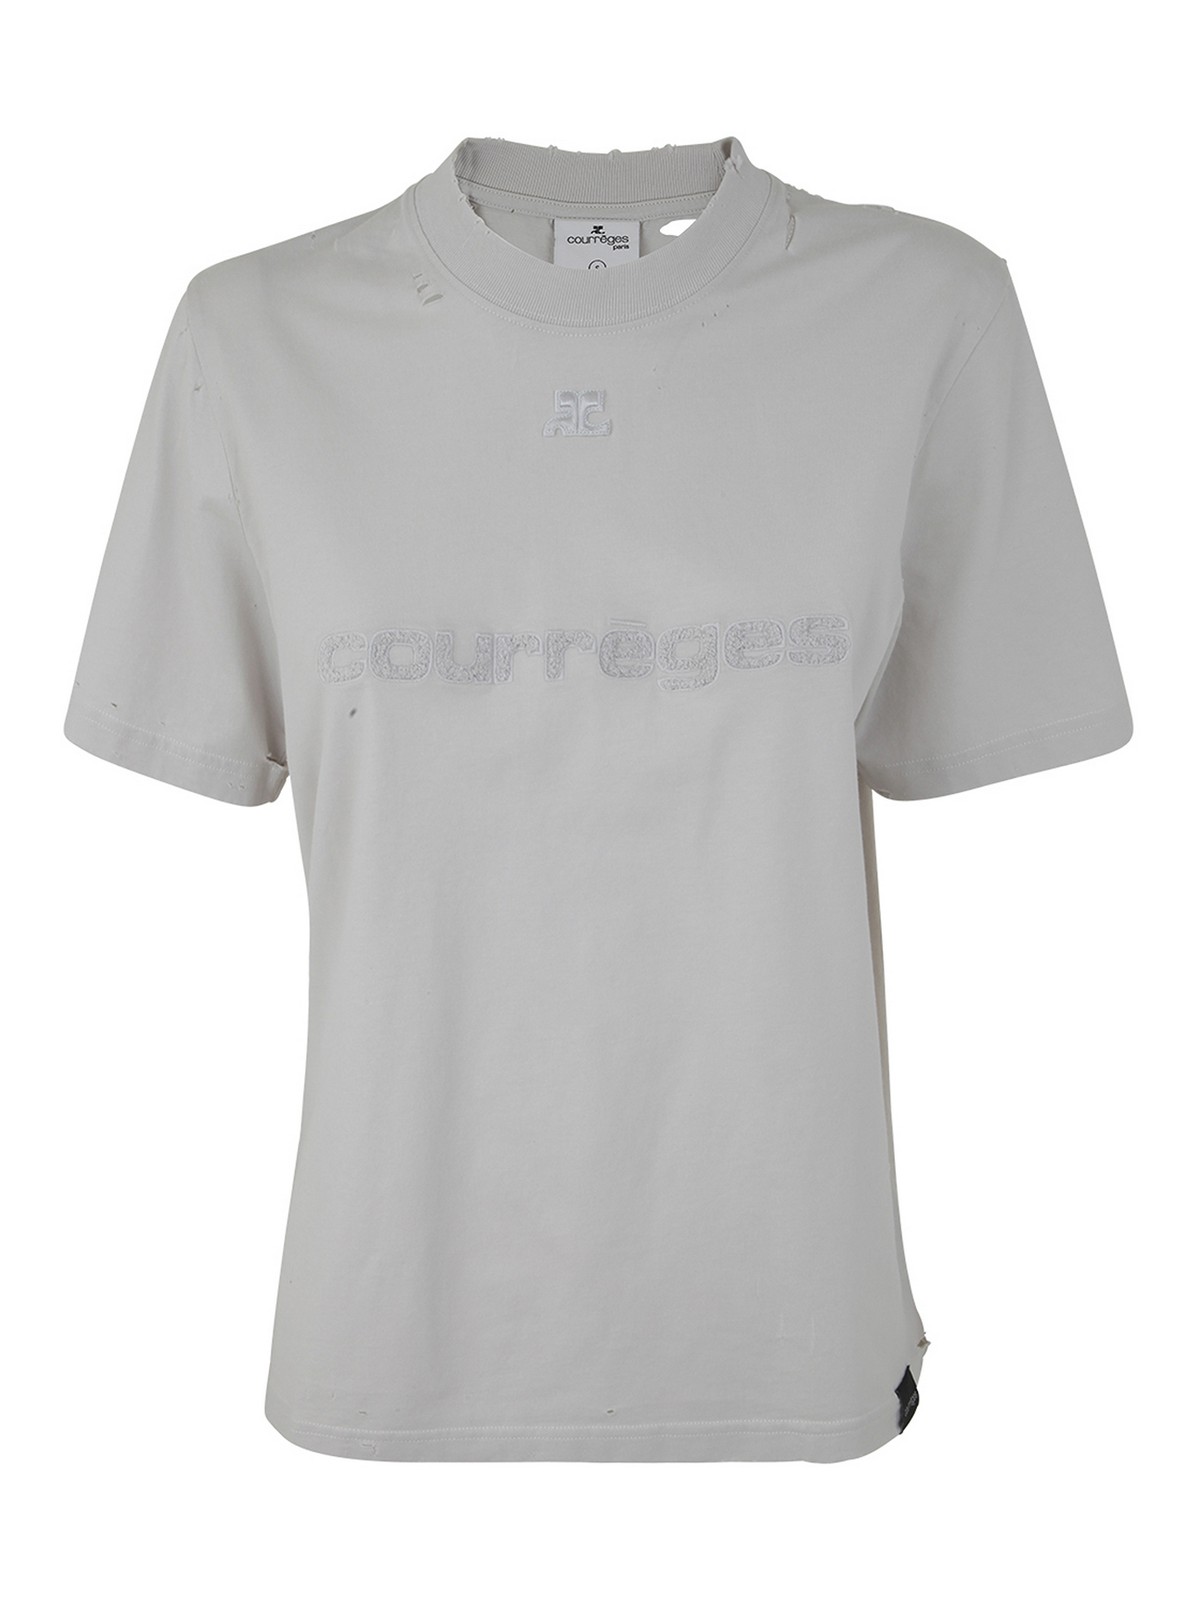 Distressed dry jersey t-shirt